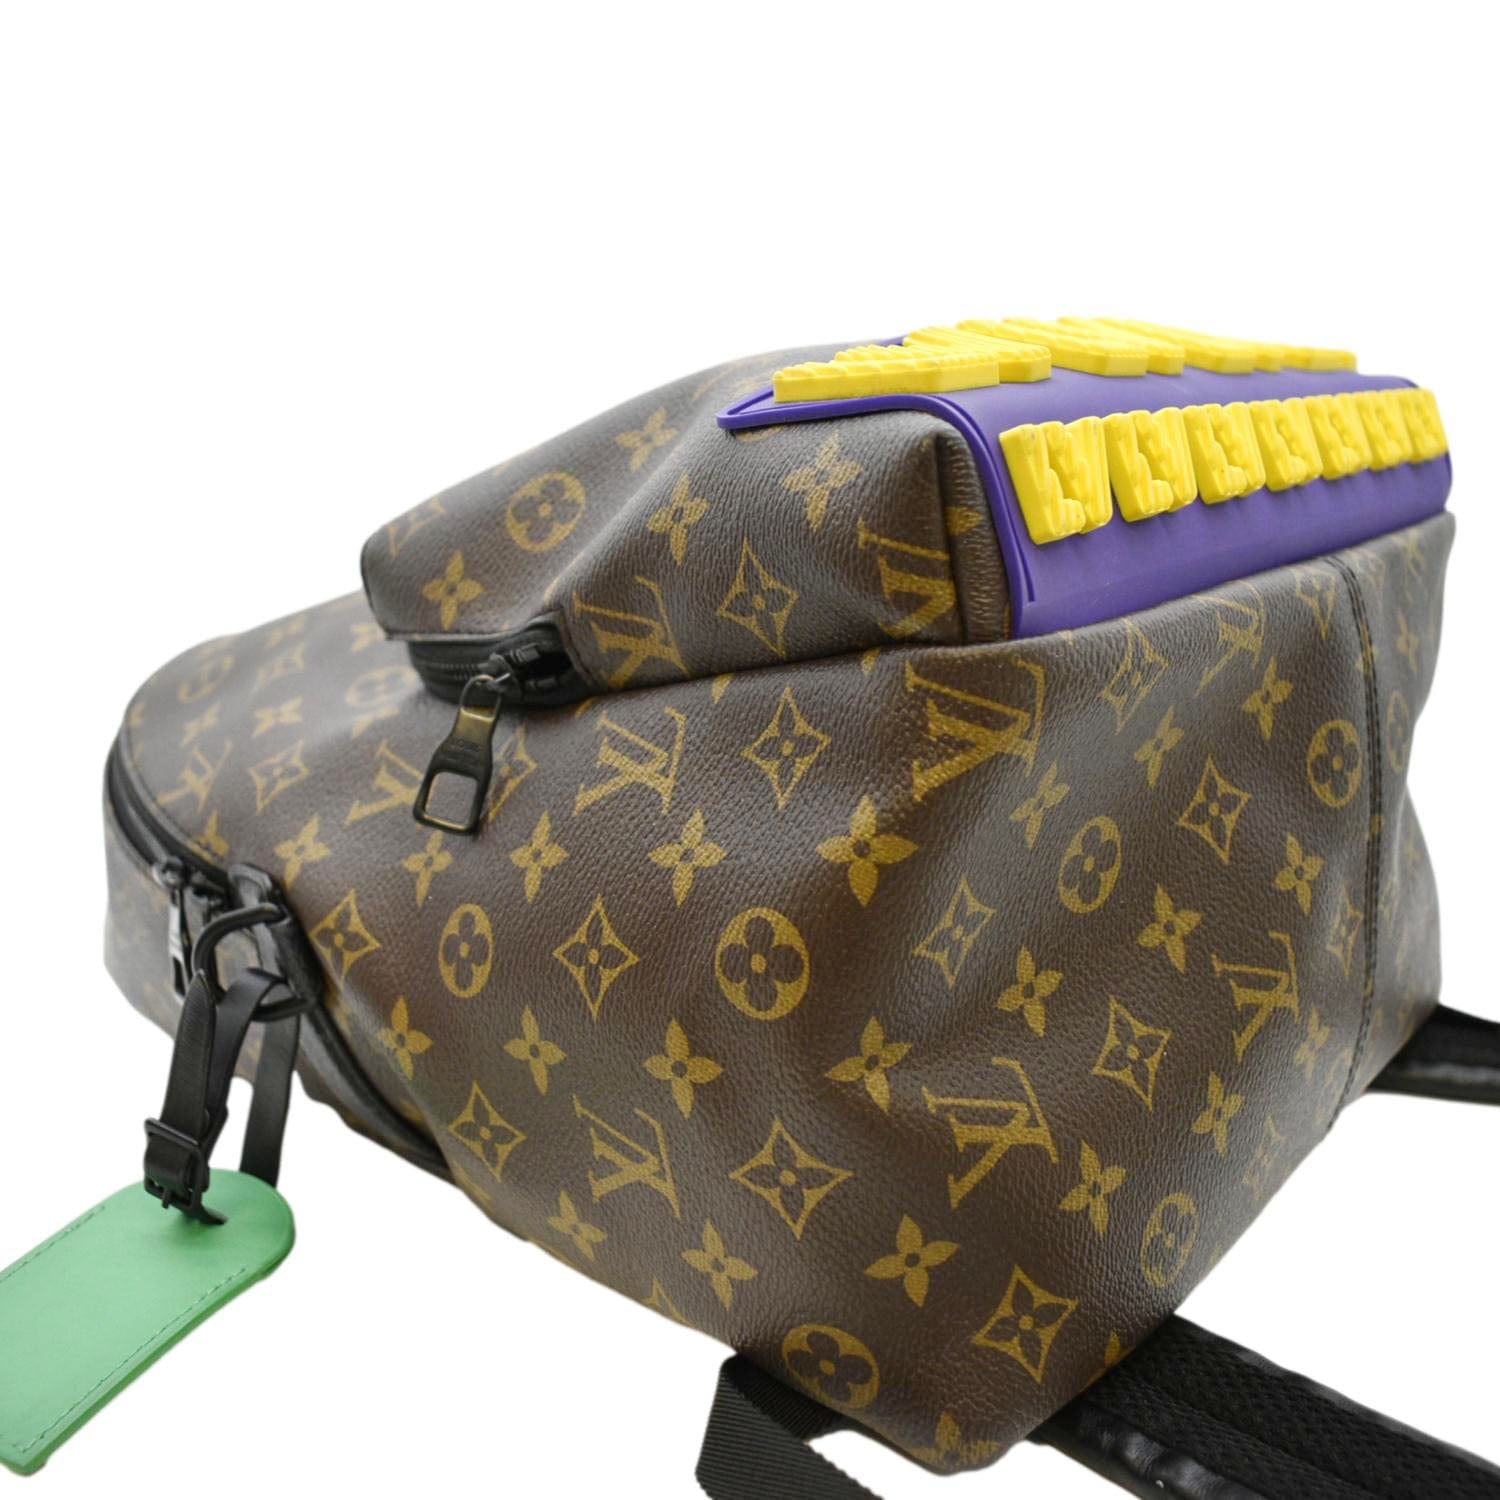 LV Discovery LV Rubber Monogram Canvas Backpack Brown